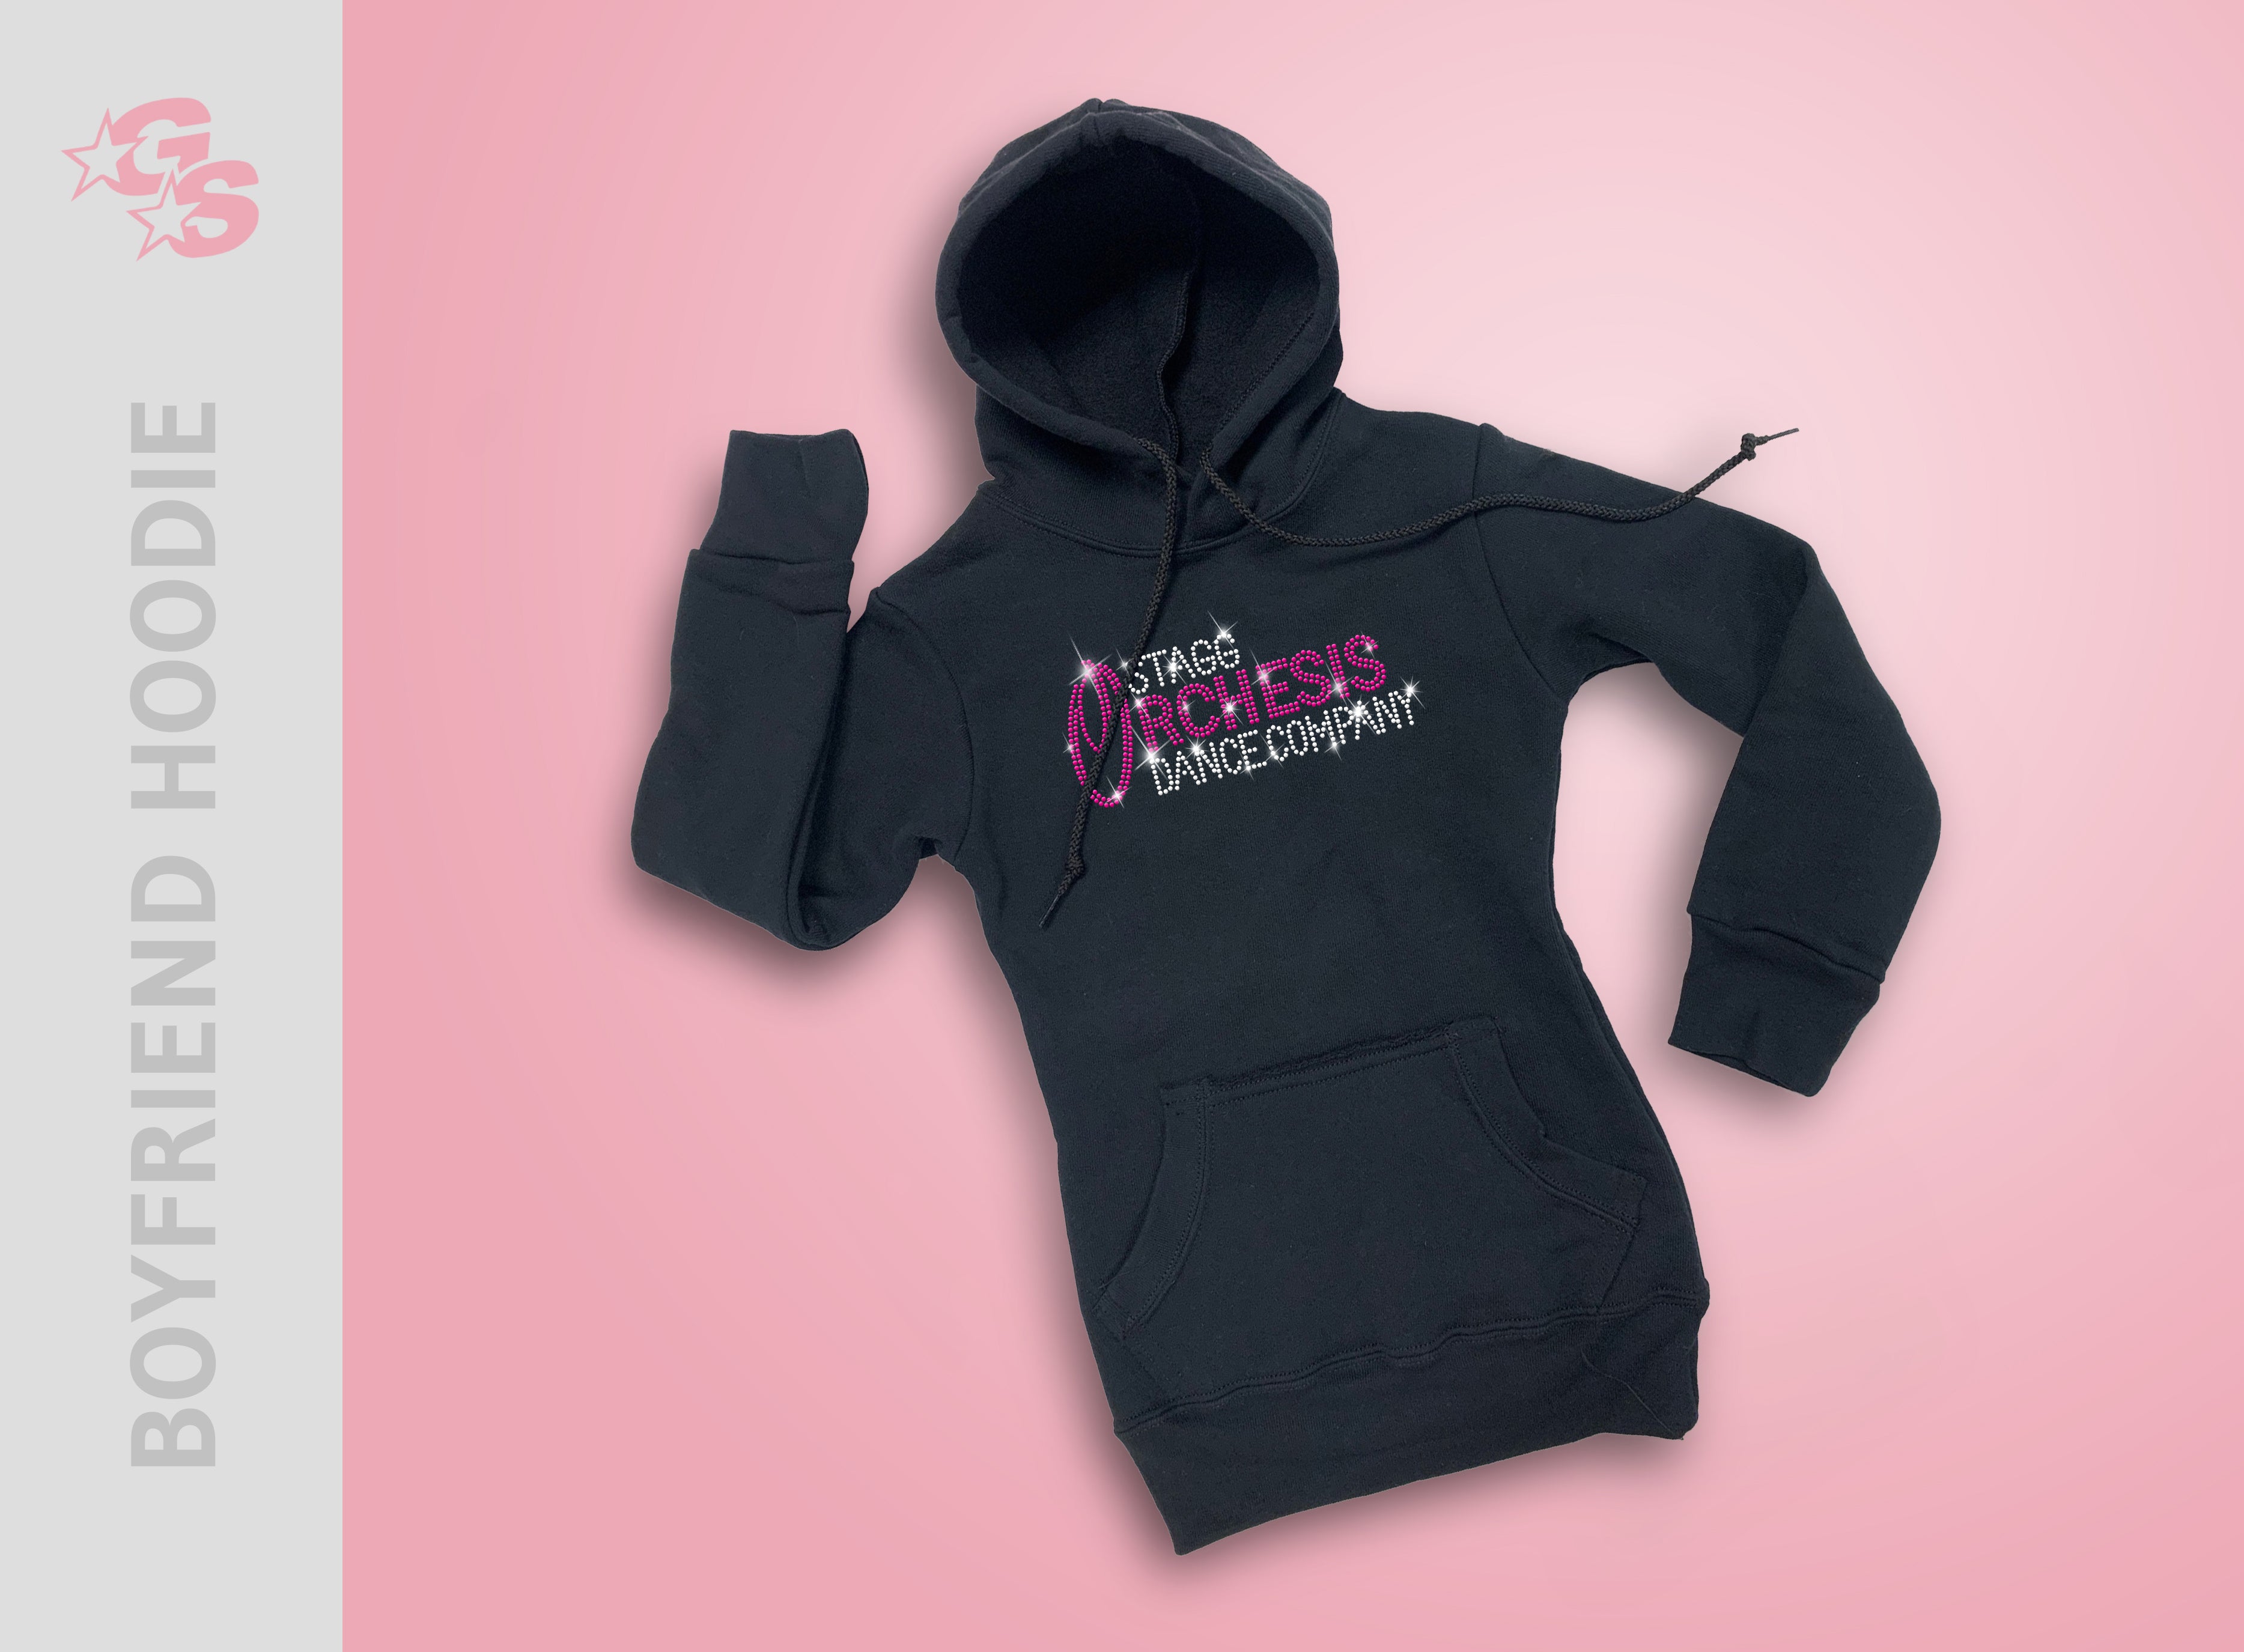 Stagg Orchesis Dance Company Boyfriend Hoodie